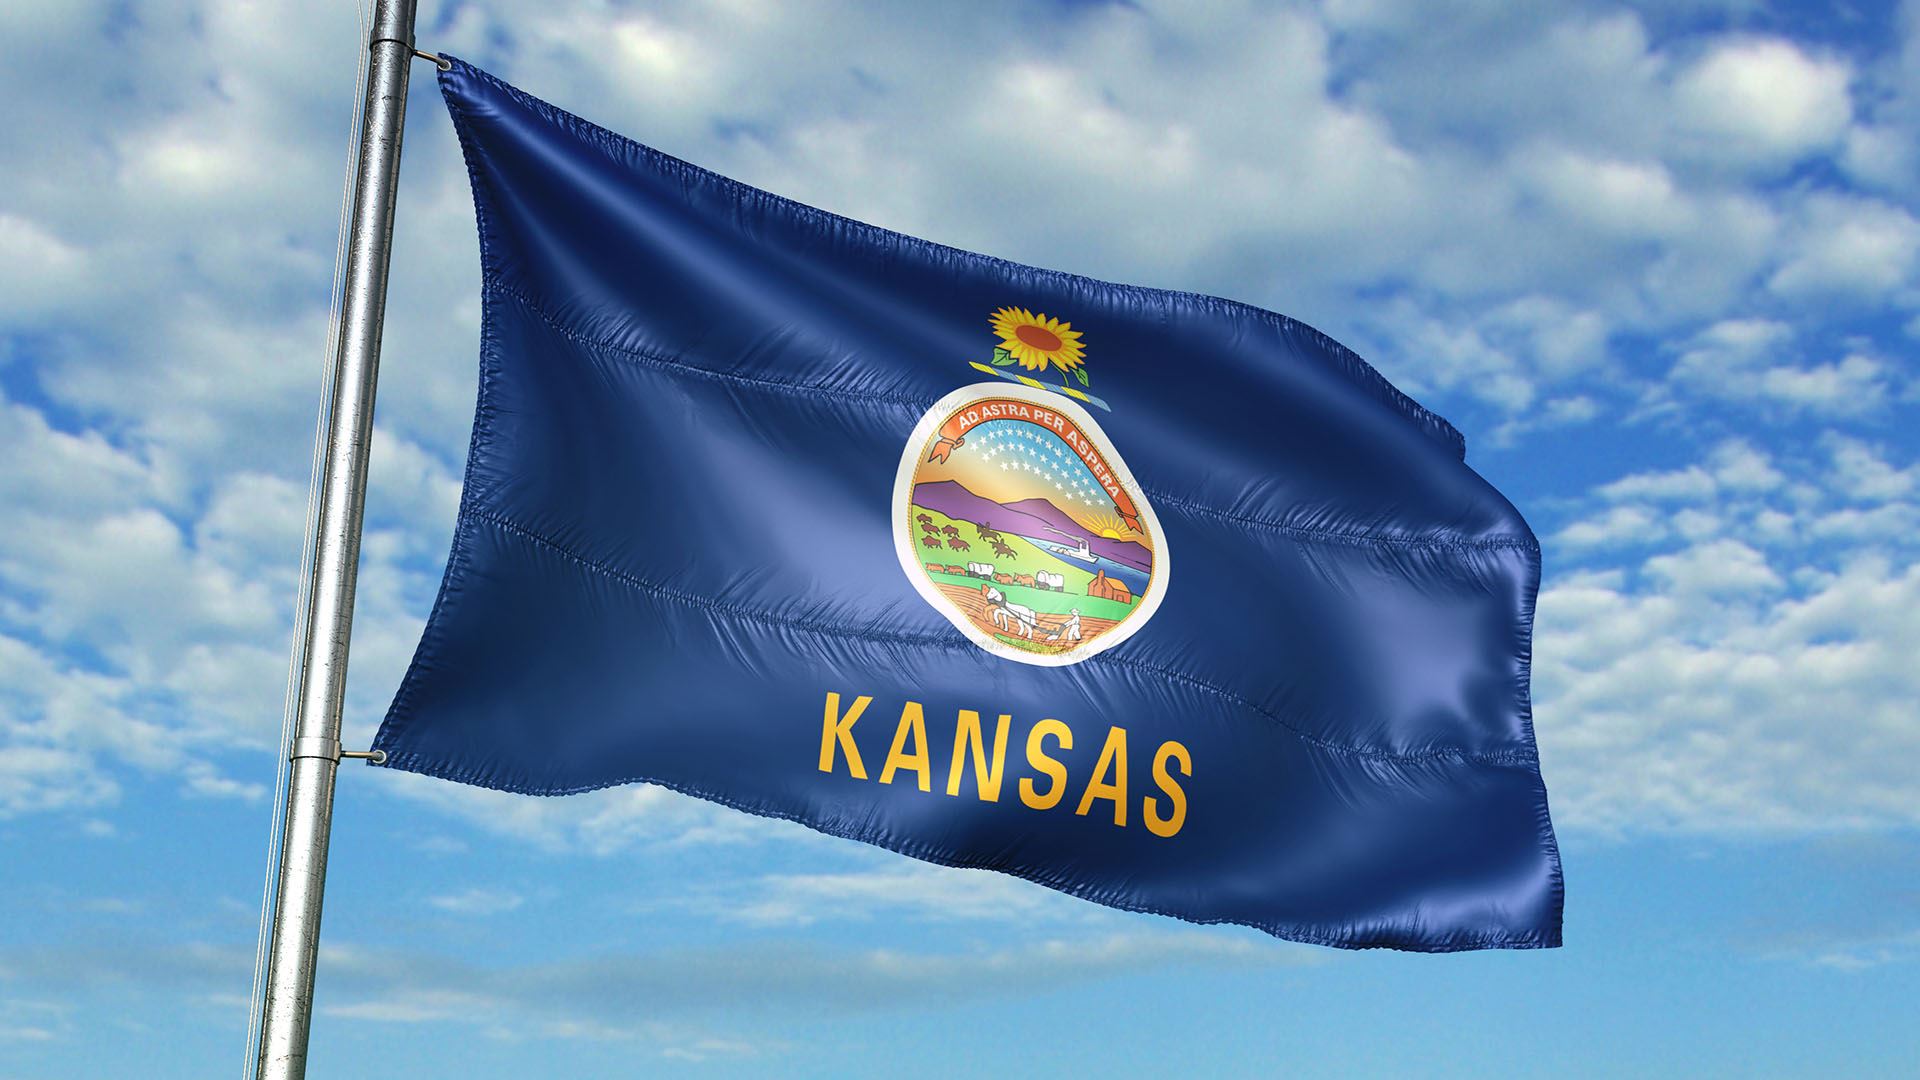 Kansas state flag flying in the wind